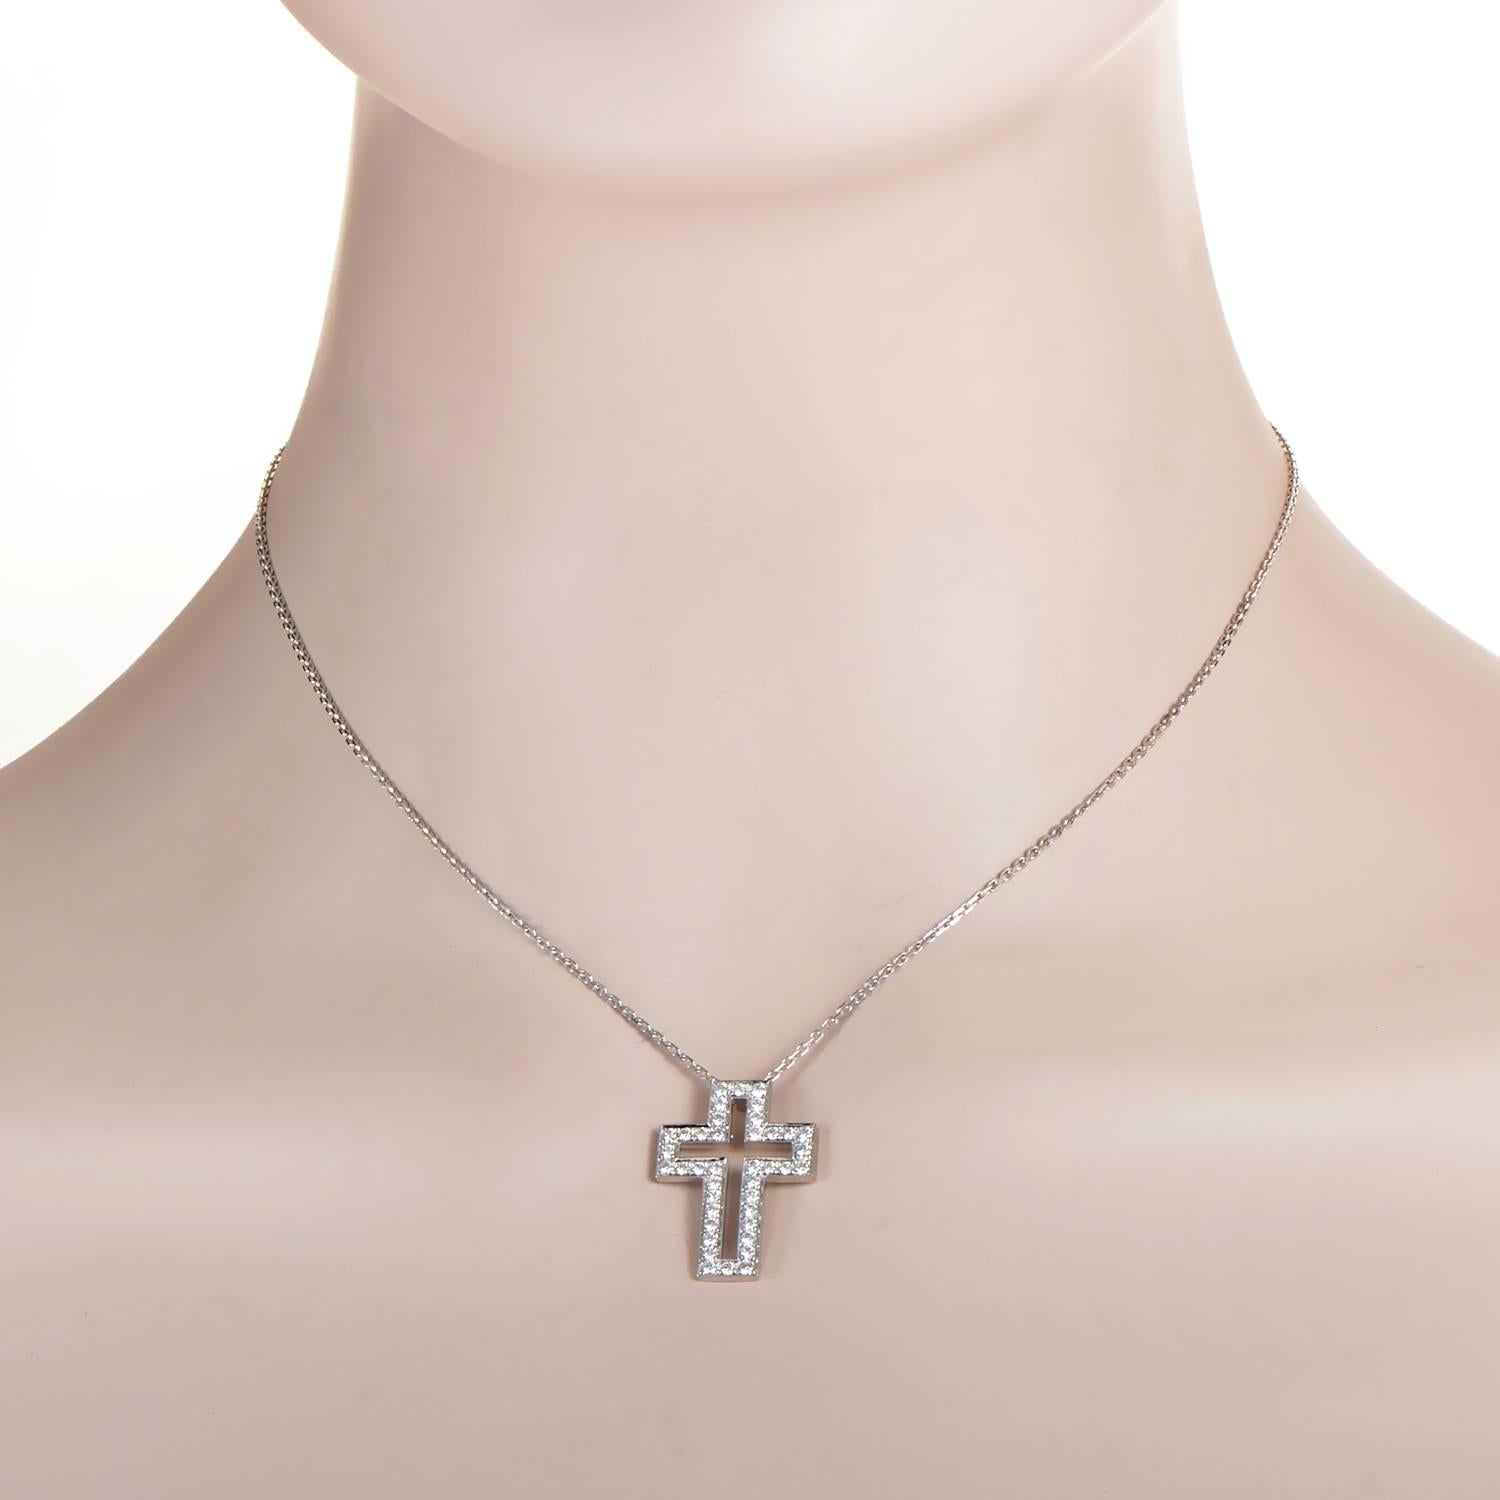 Honoring the timeless principles of minimalist elegance and tasteful glamour, this fabulous necklace from Boucheron relies on the powerful symbol of a cross and its magnetic appeal, while 18K white gold and approximately 1.00 carat of diamonds